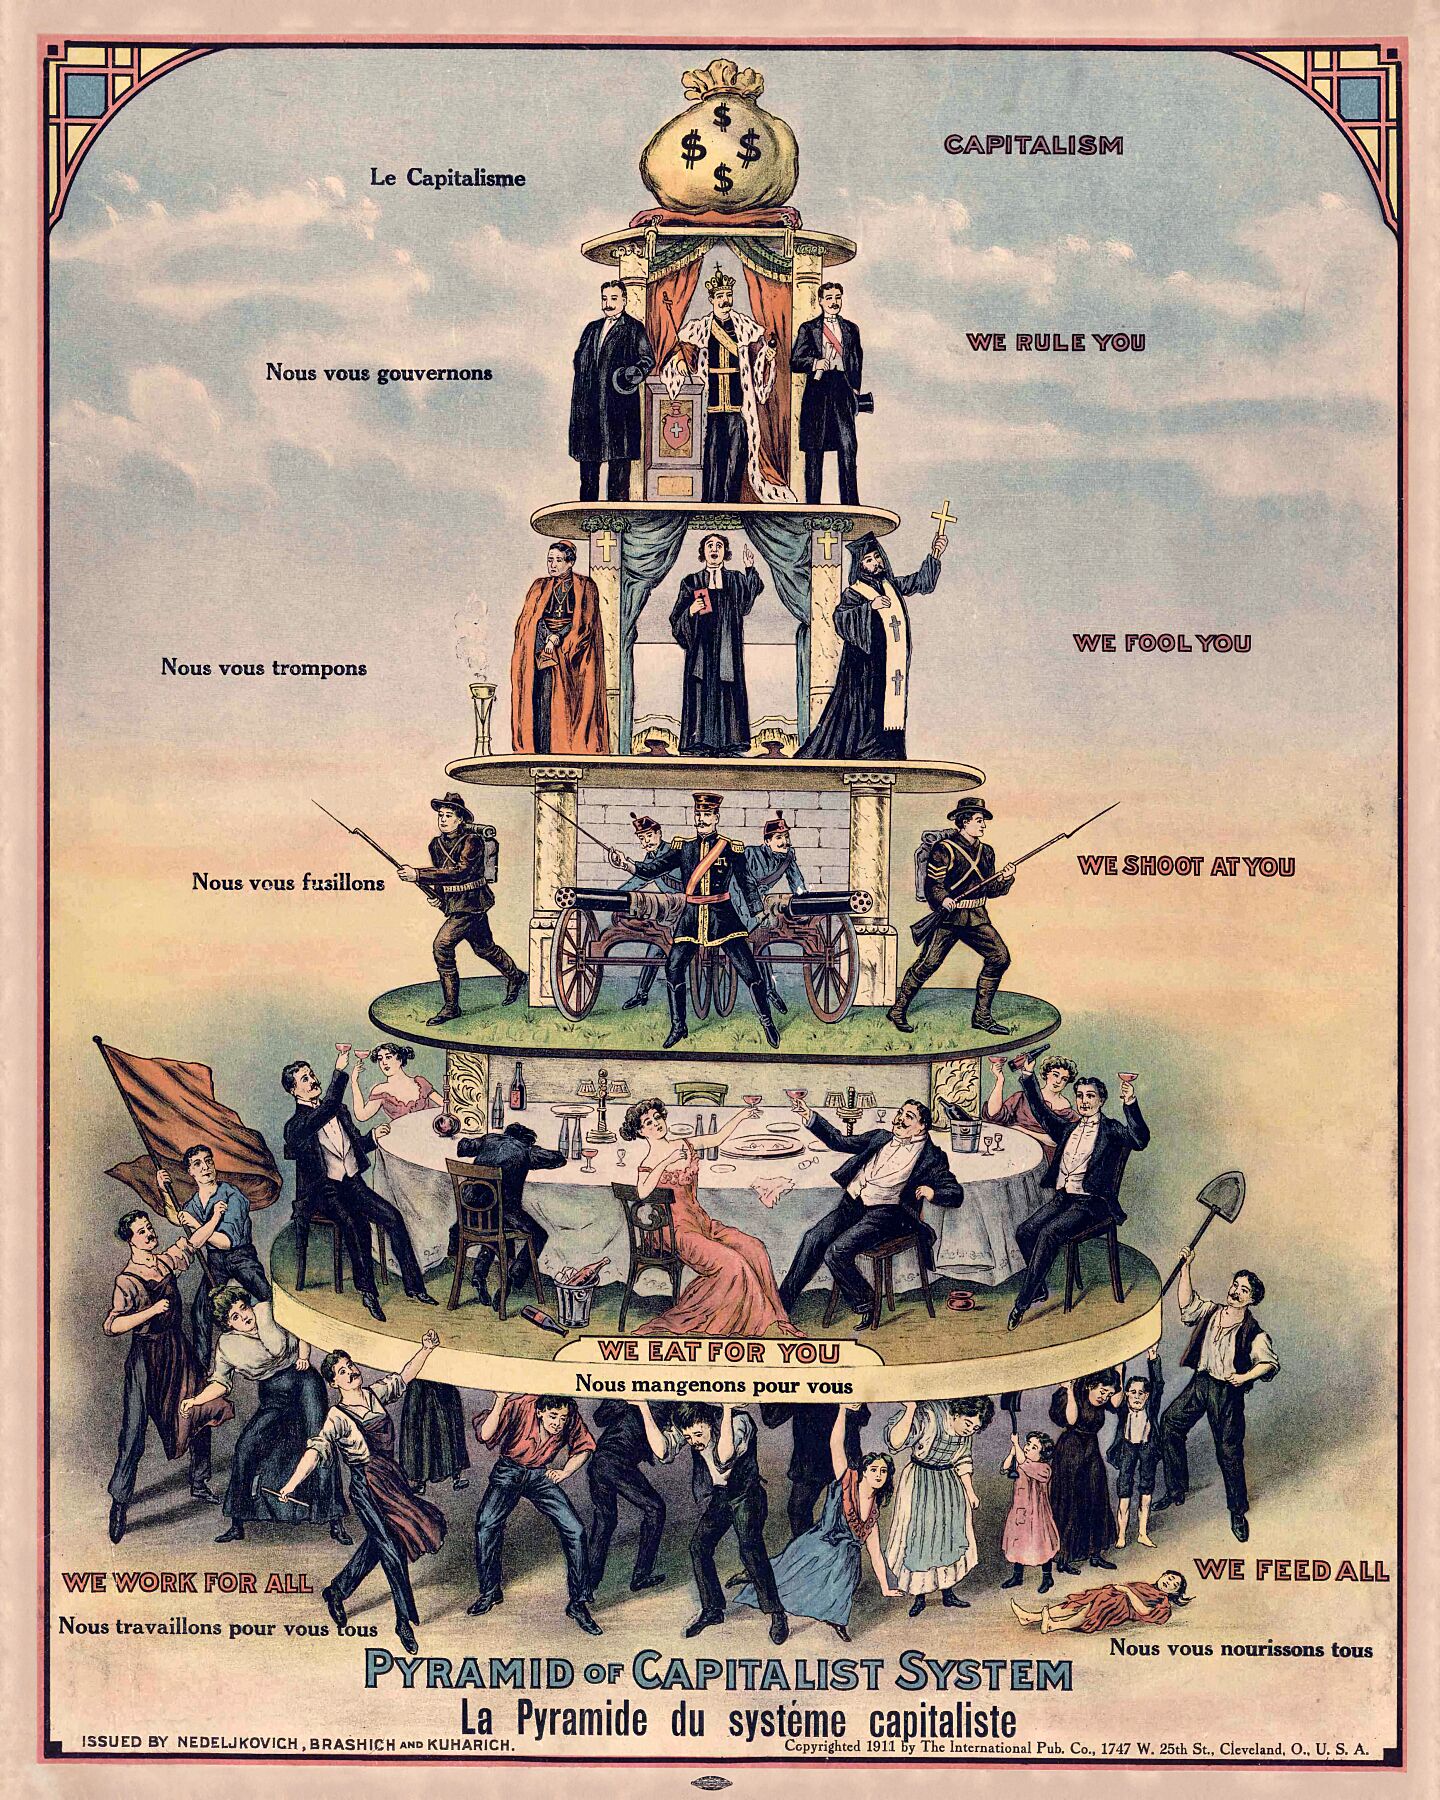 Pyramid of Capitalist System - A 1911 poster published in the Industrial Worker (a newspaper of the Industrial Workers of the World)